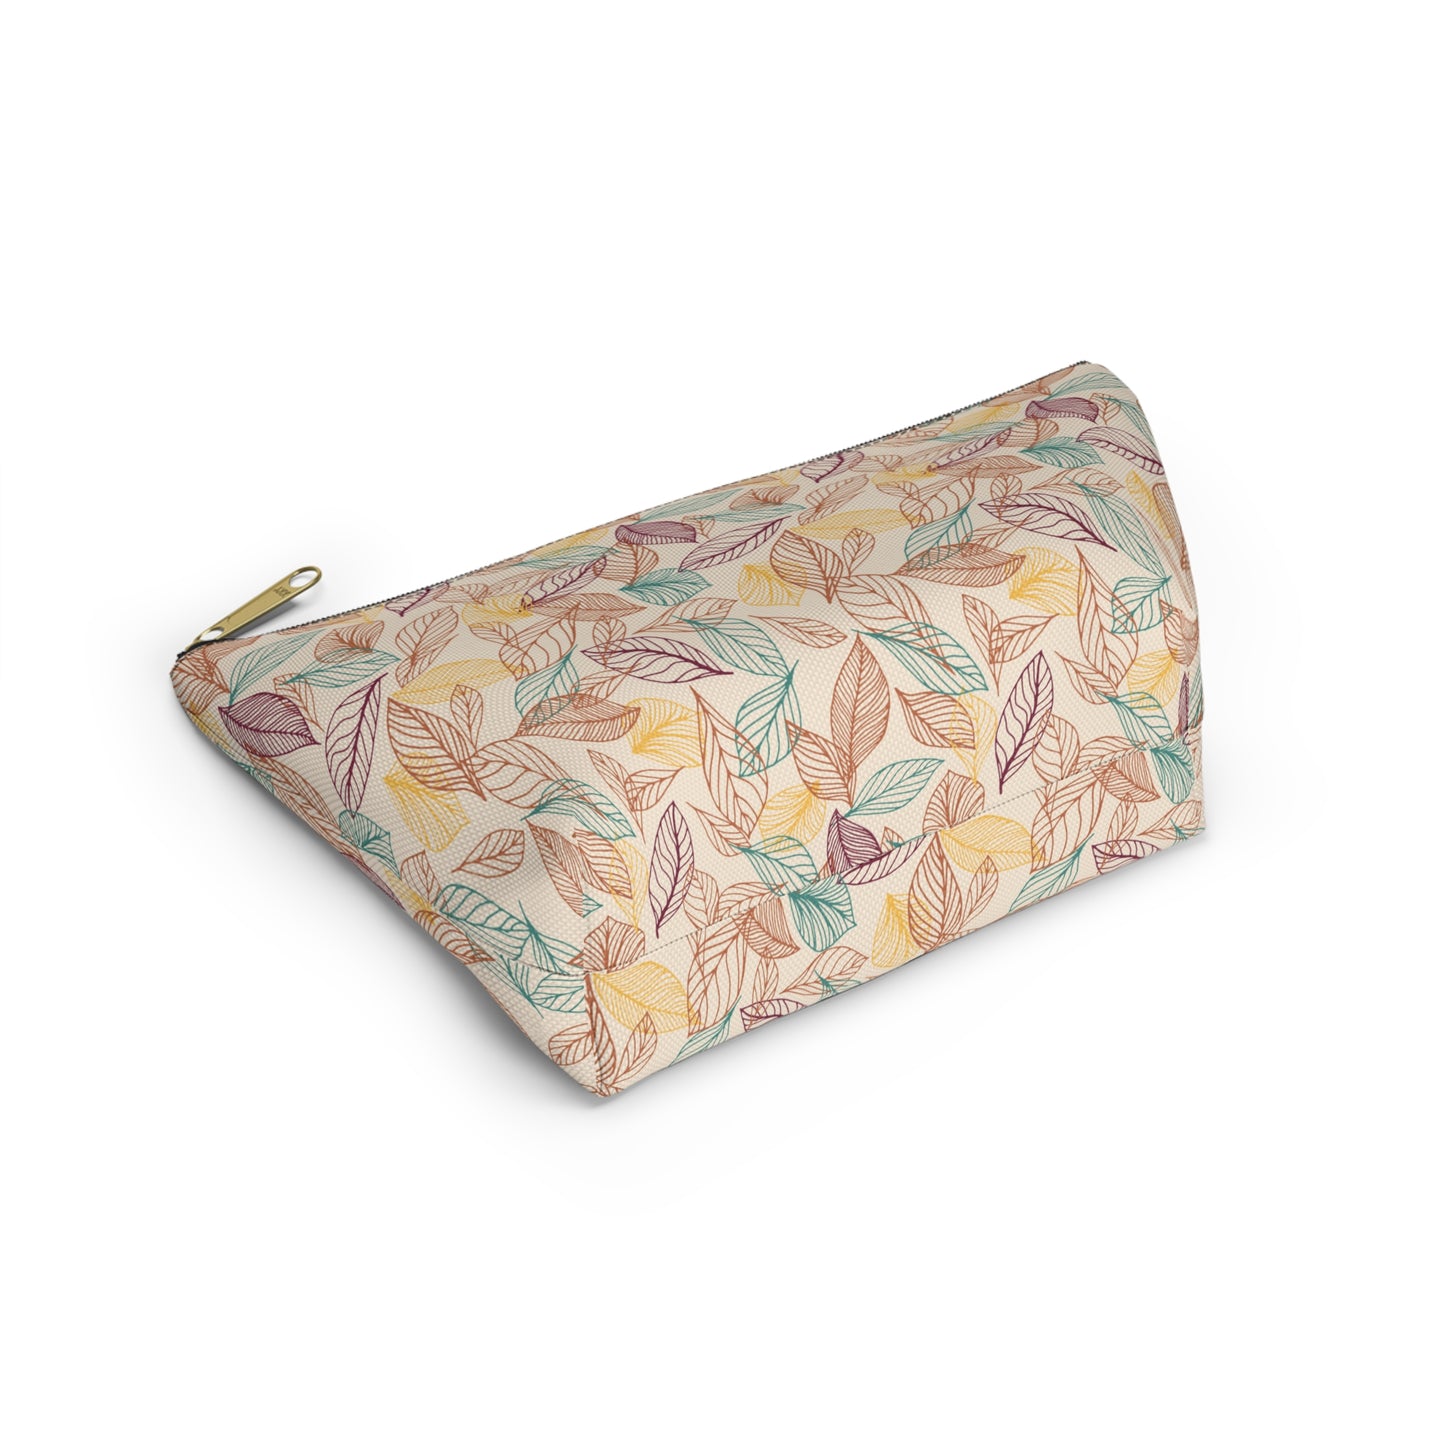 Accessory Pouch in Fall Leaf Lines Pattern